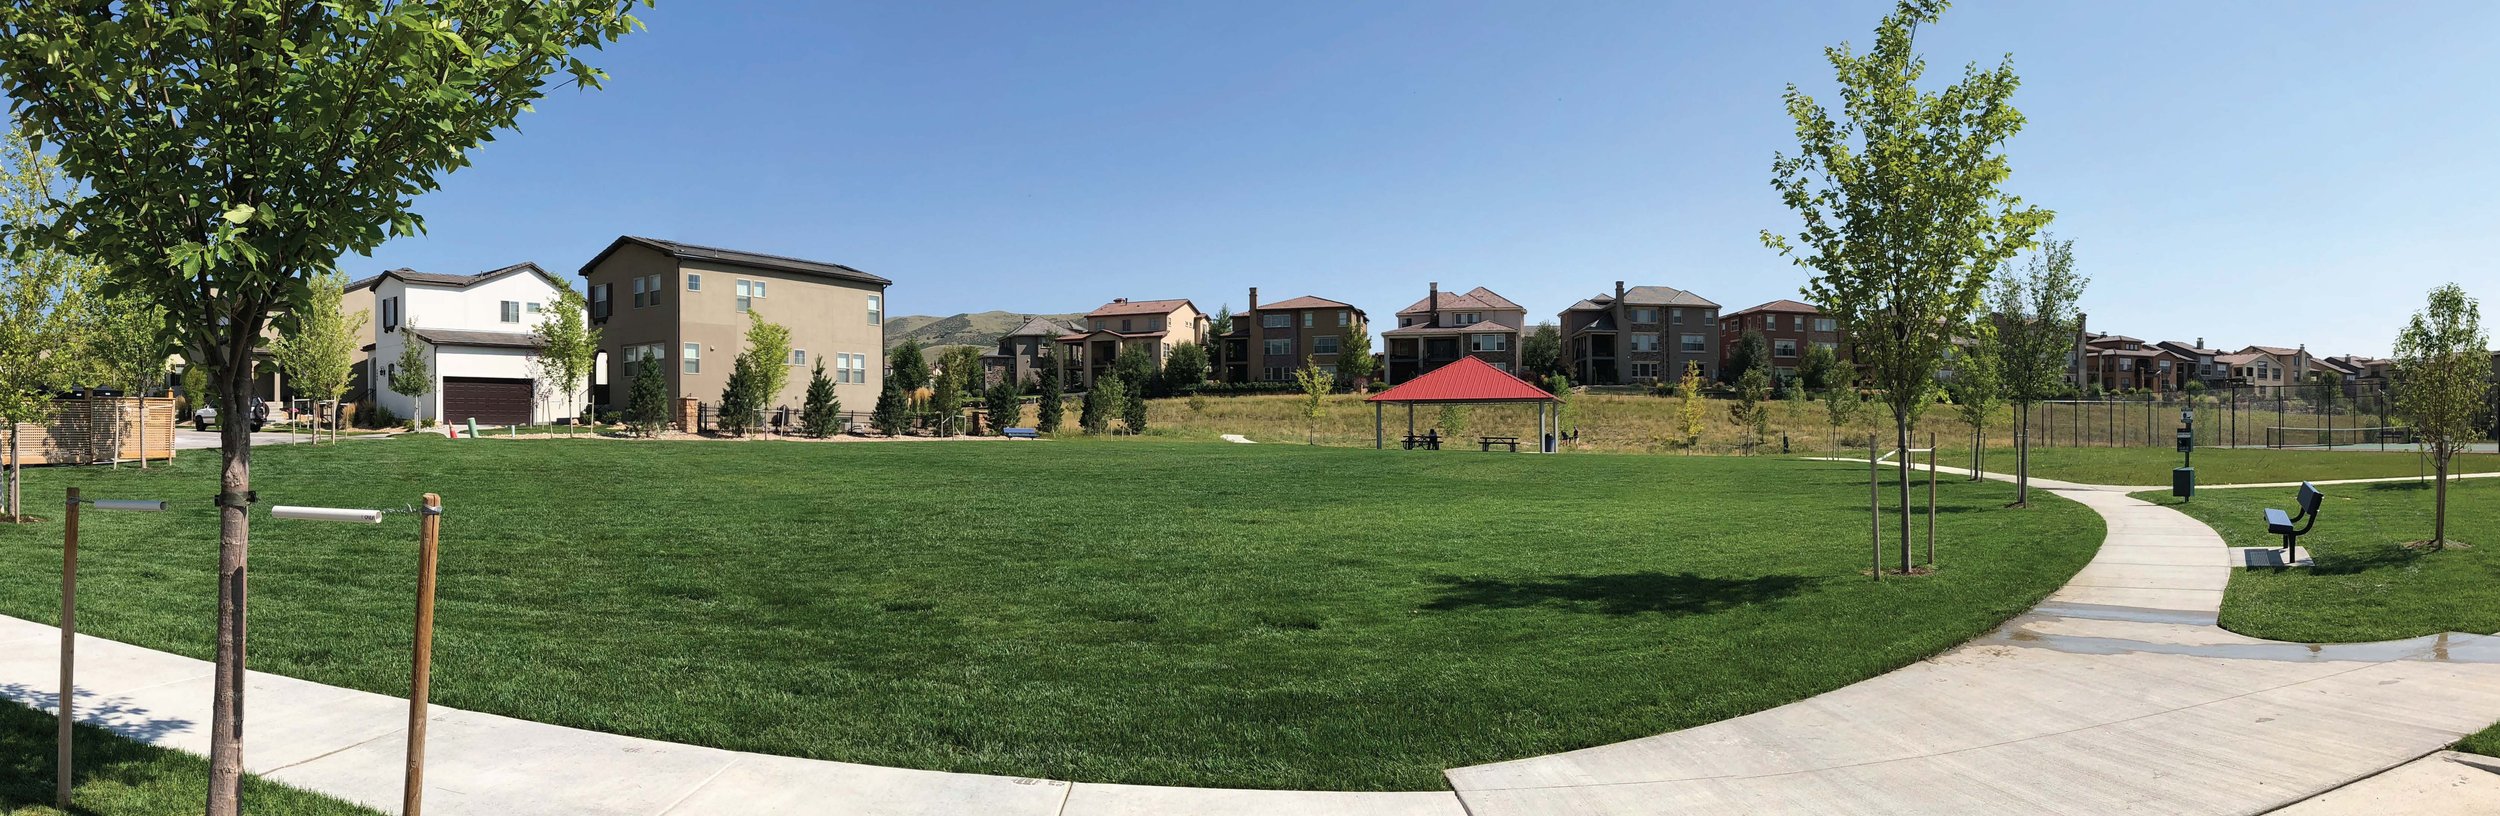 Orchard Park Pano - Looking across lawn to shelter.jpg